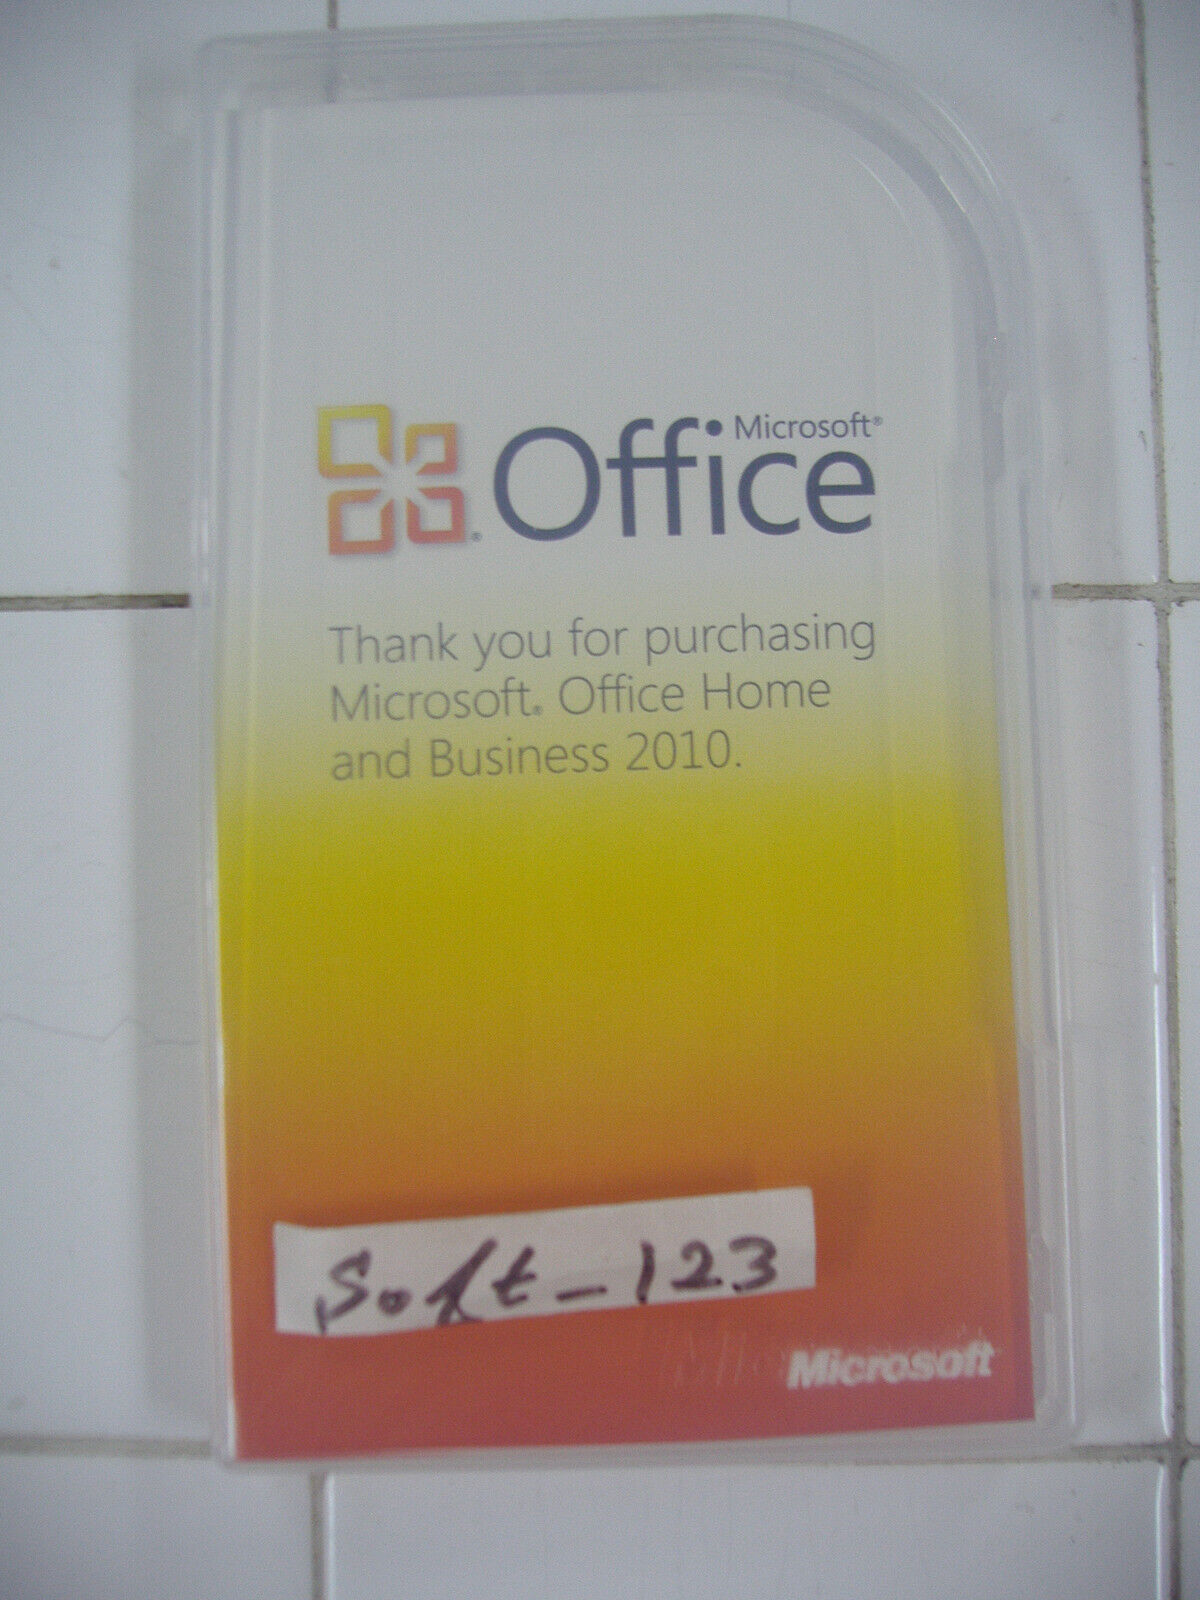 MS Microsoft Office 2010 Home and Business Product Key Card (PKC)